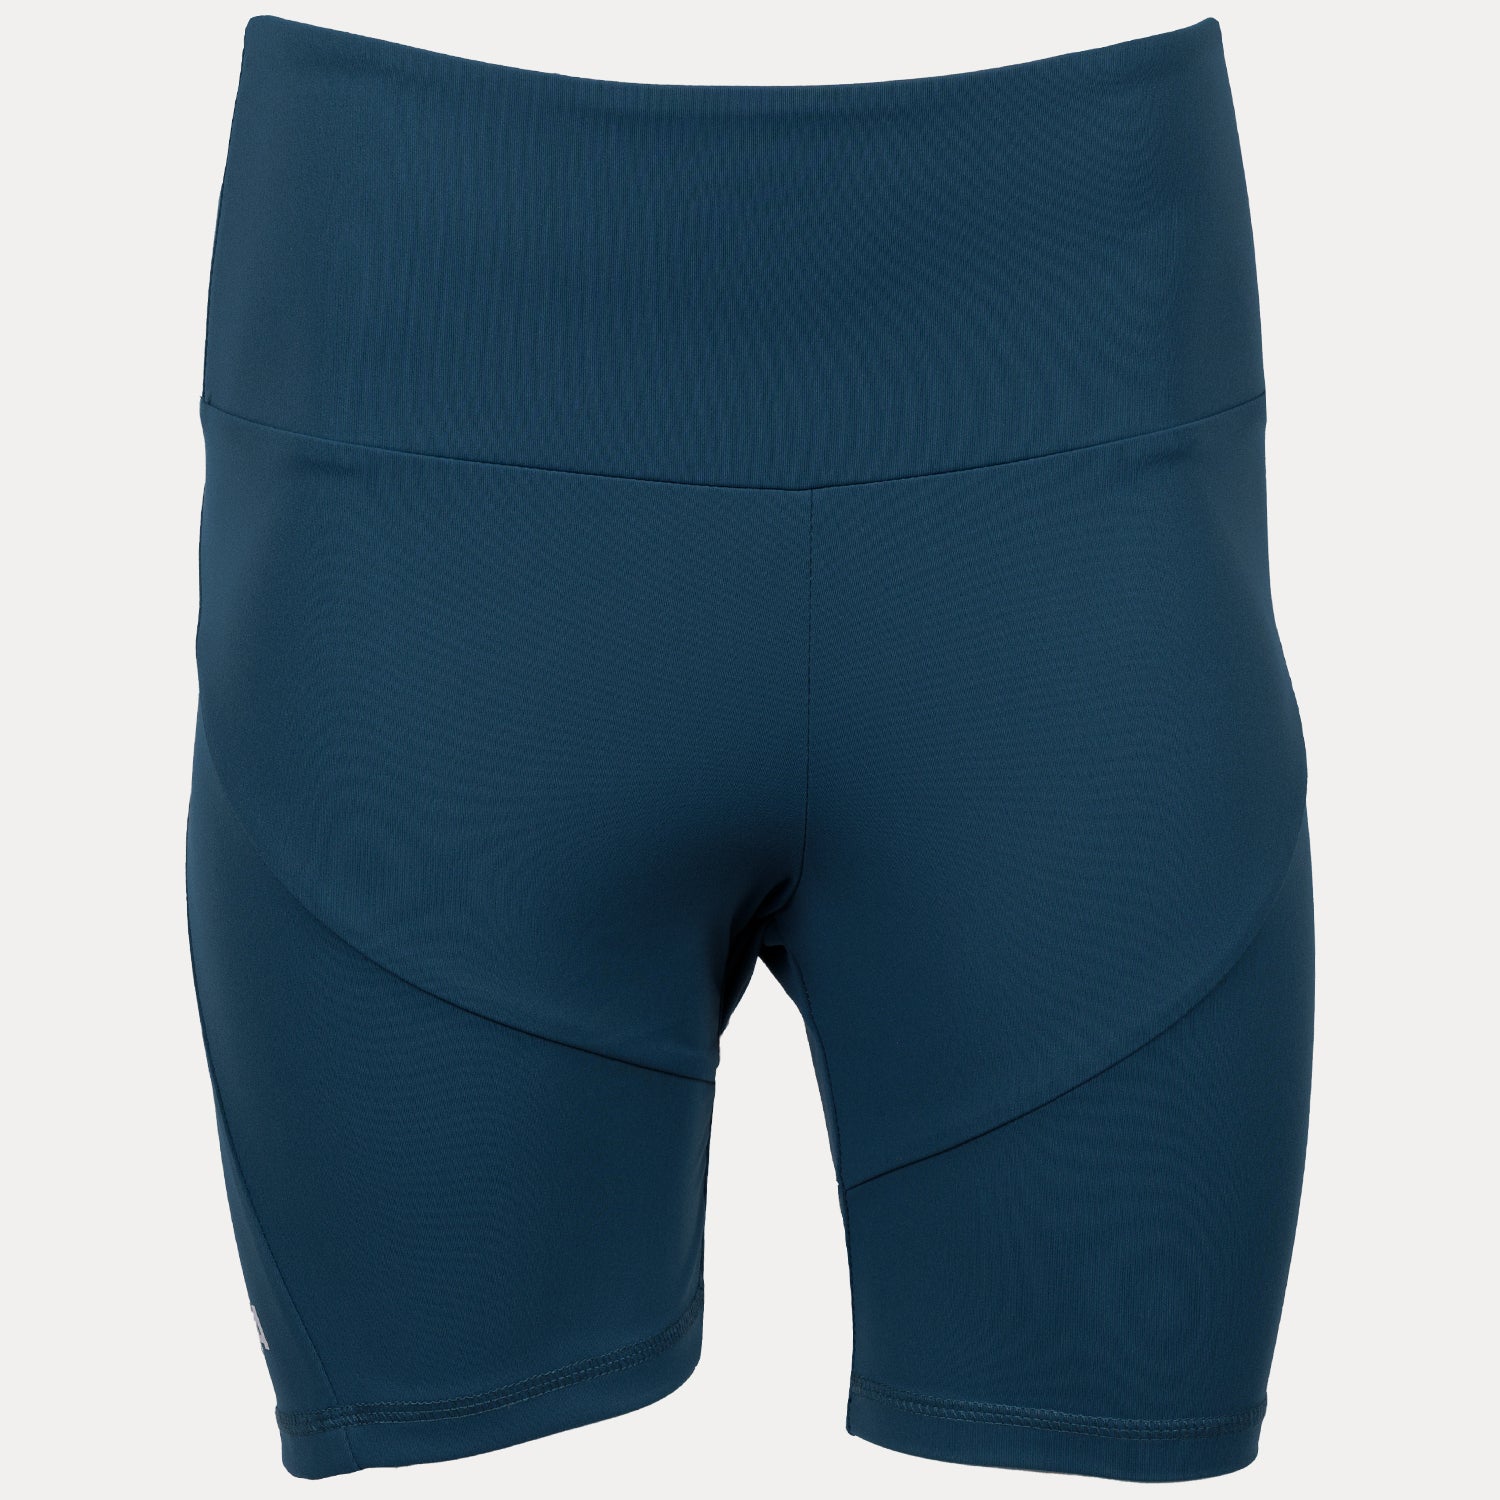 front view of women's compression short in teal